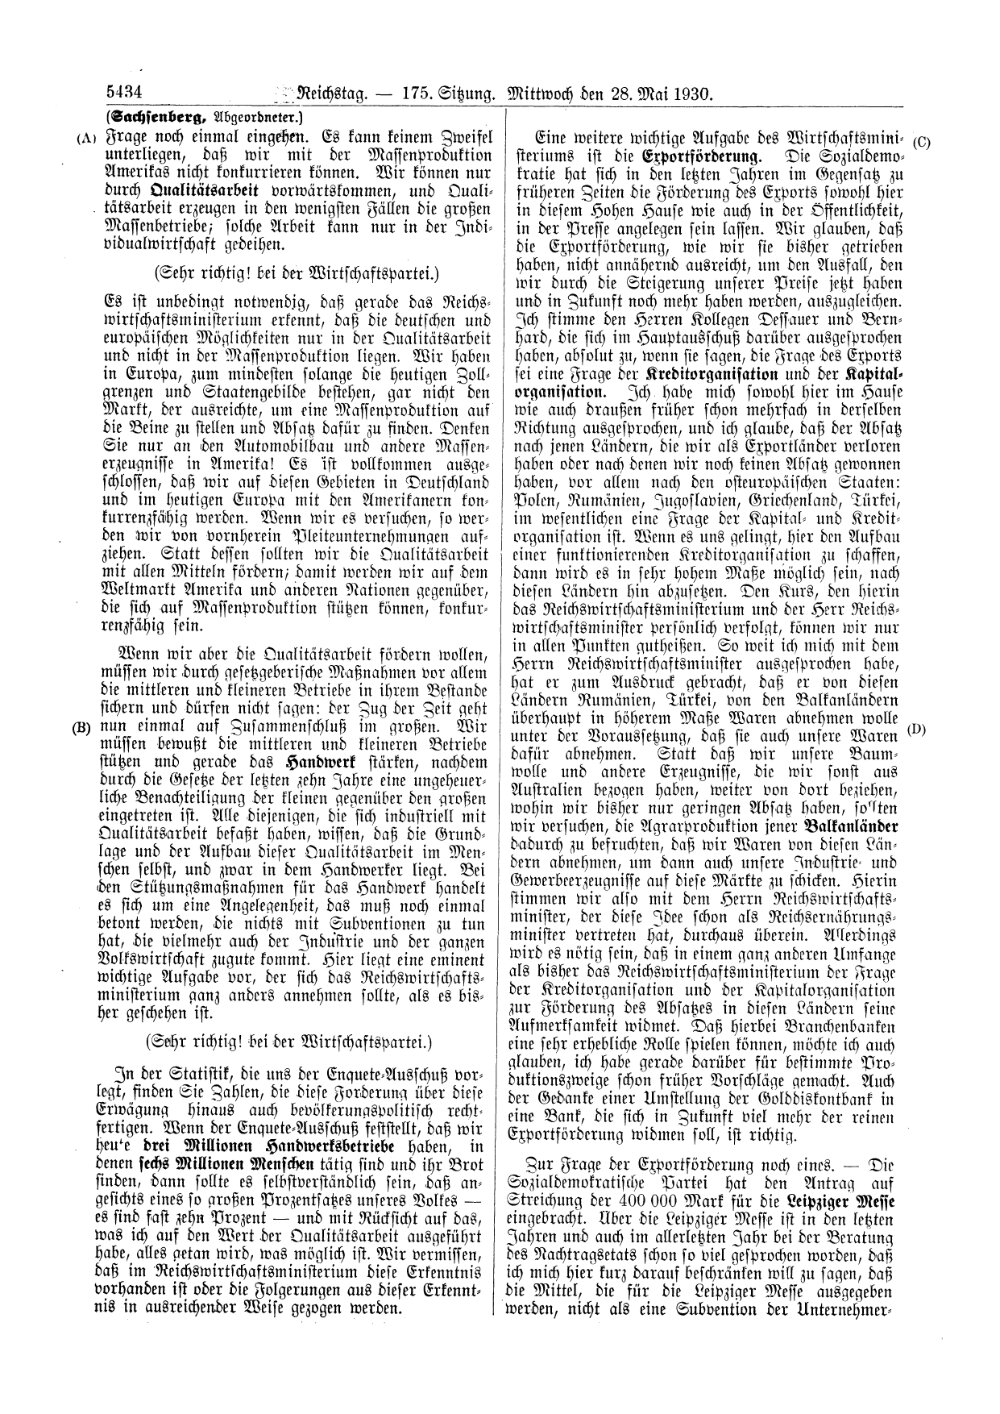 Scan of page 5434